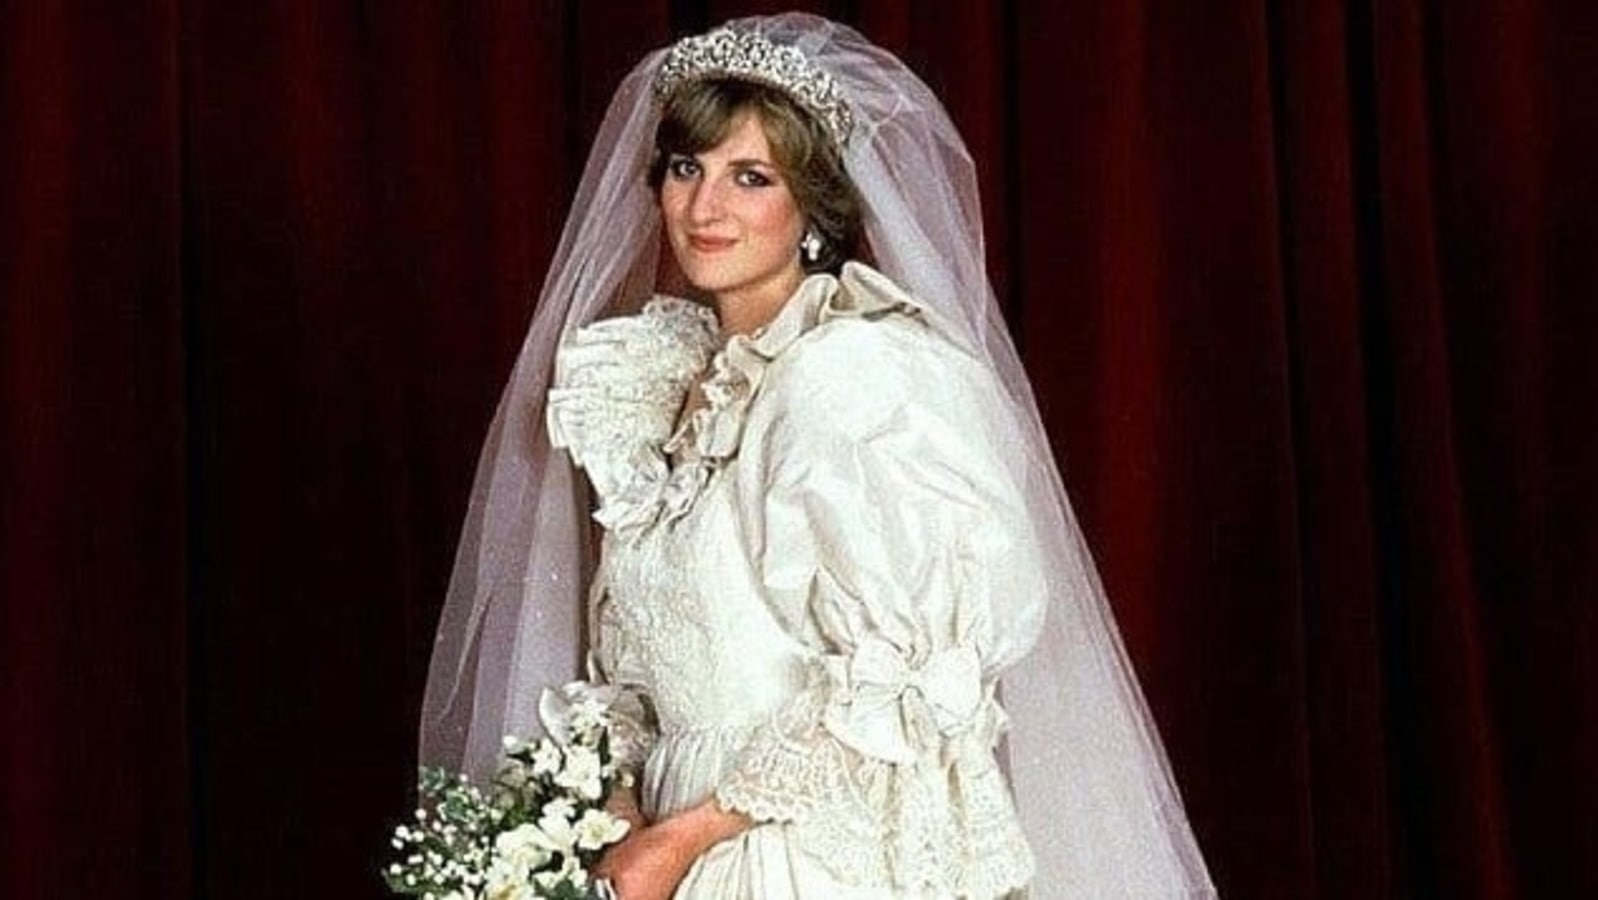 Princess Diana S Iconic Wedding Gown To Go On Display At